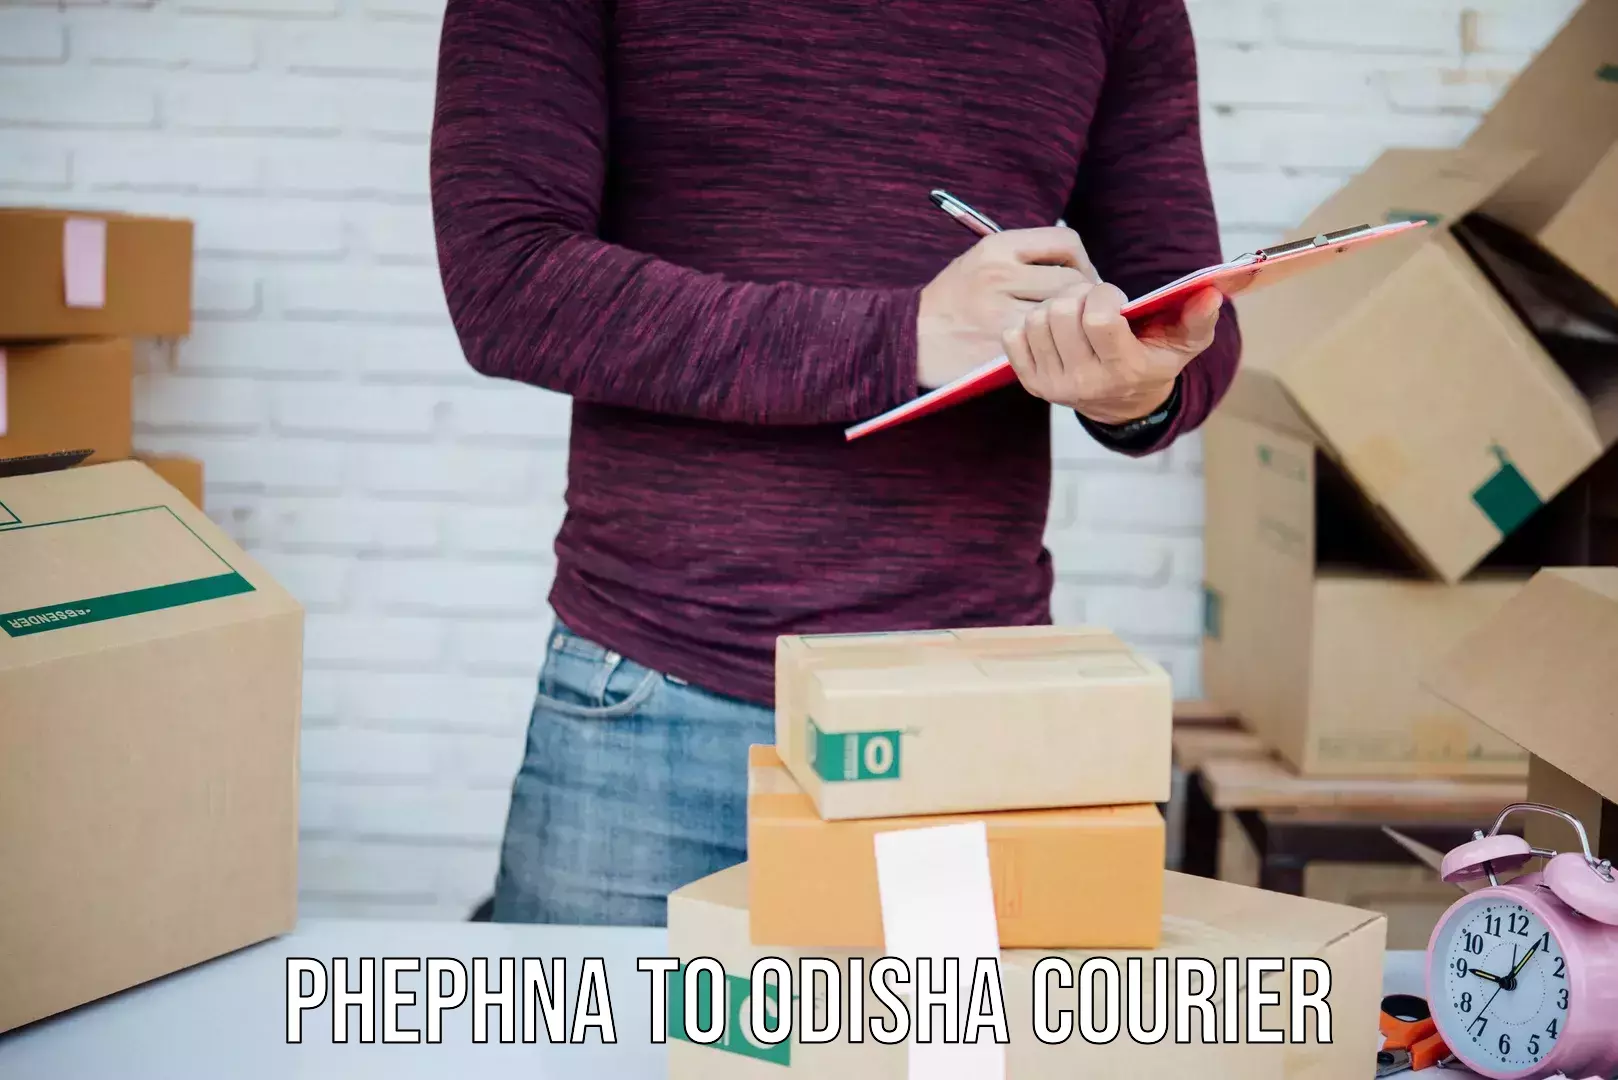 Personal courier services Phephna to Ukhunda